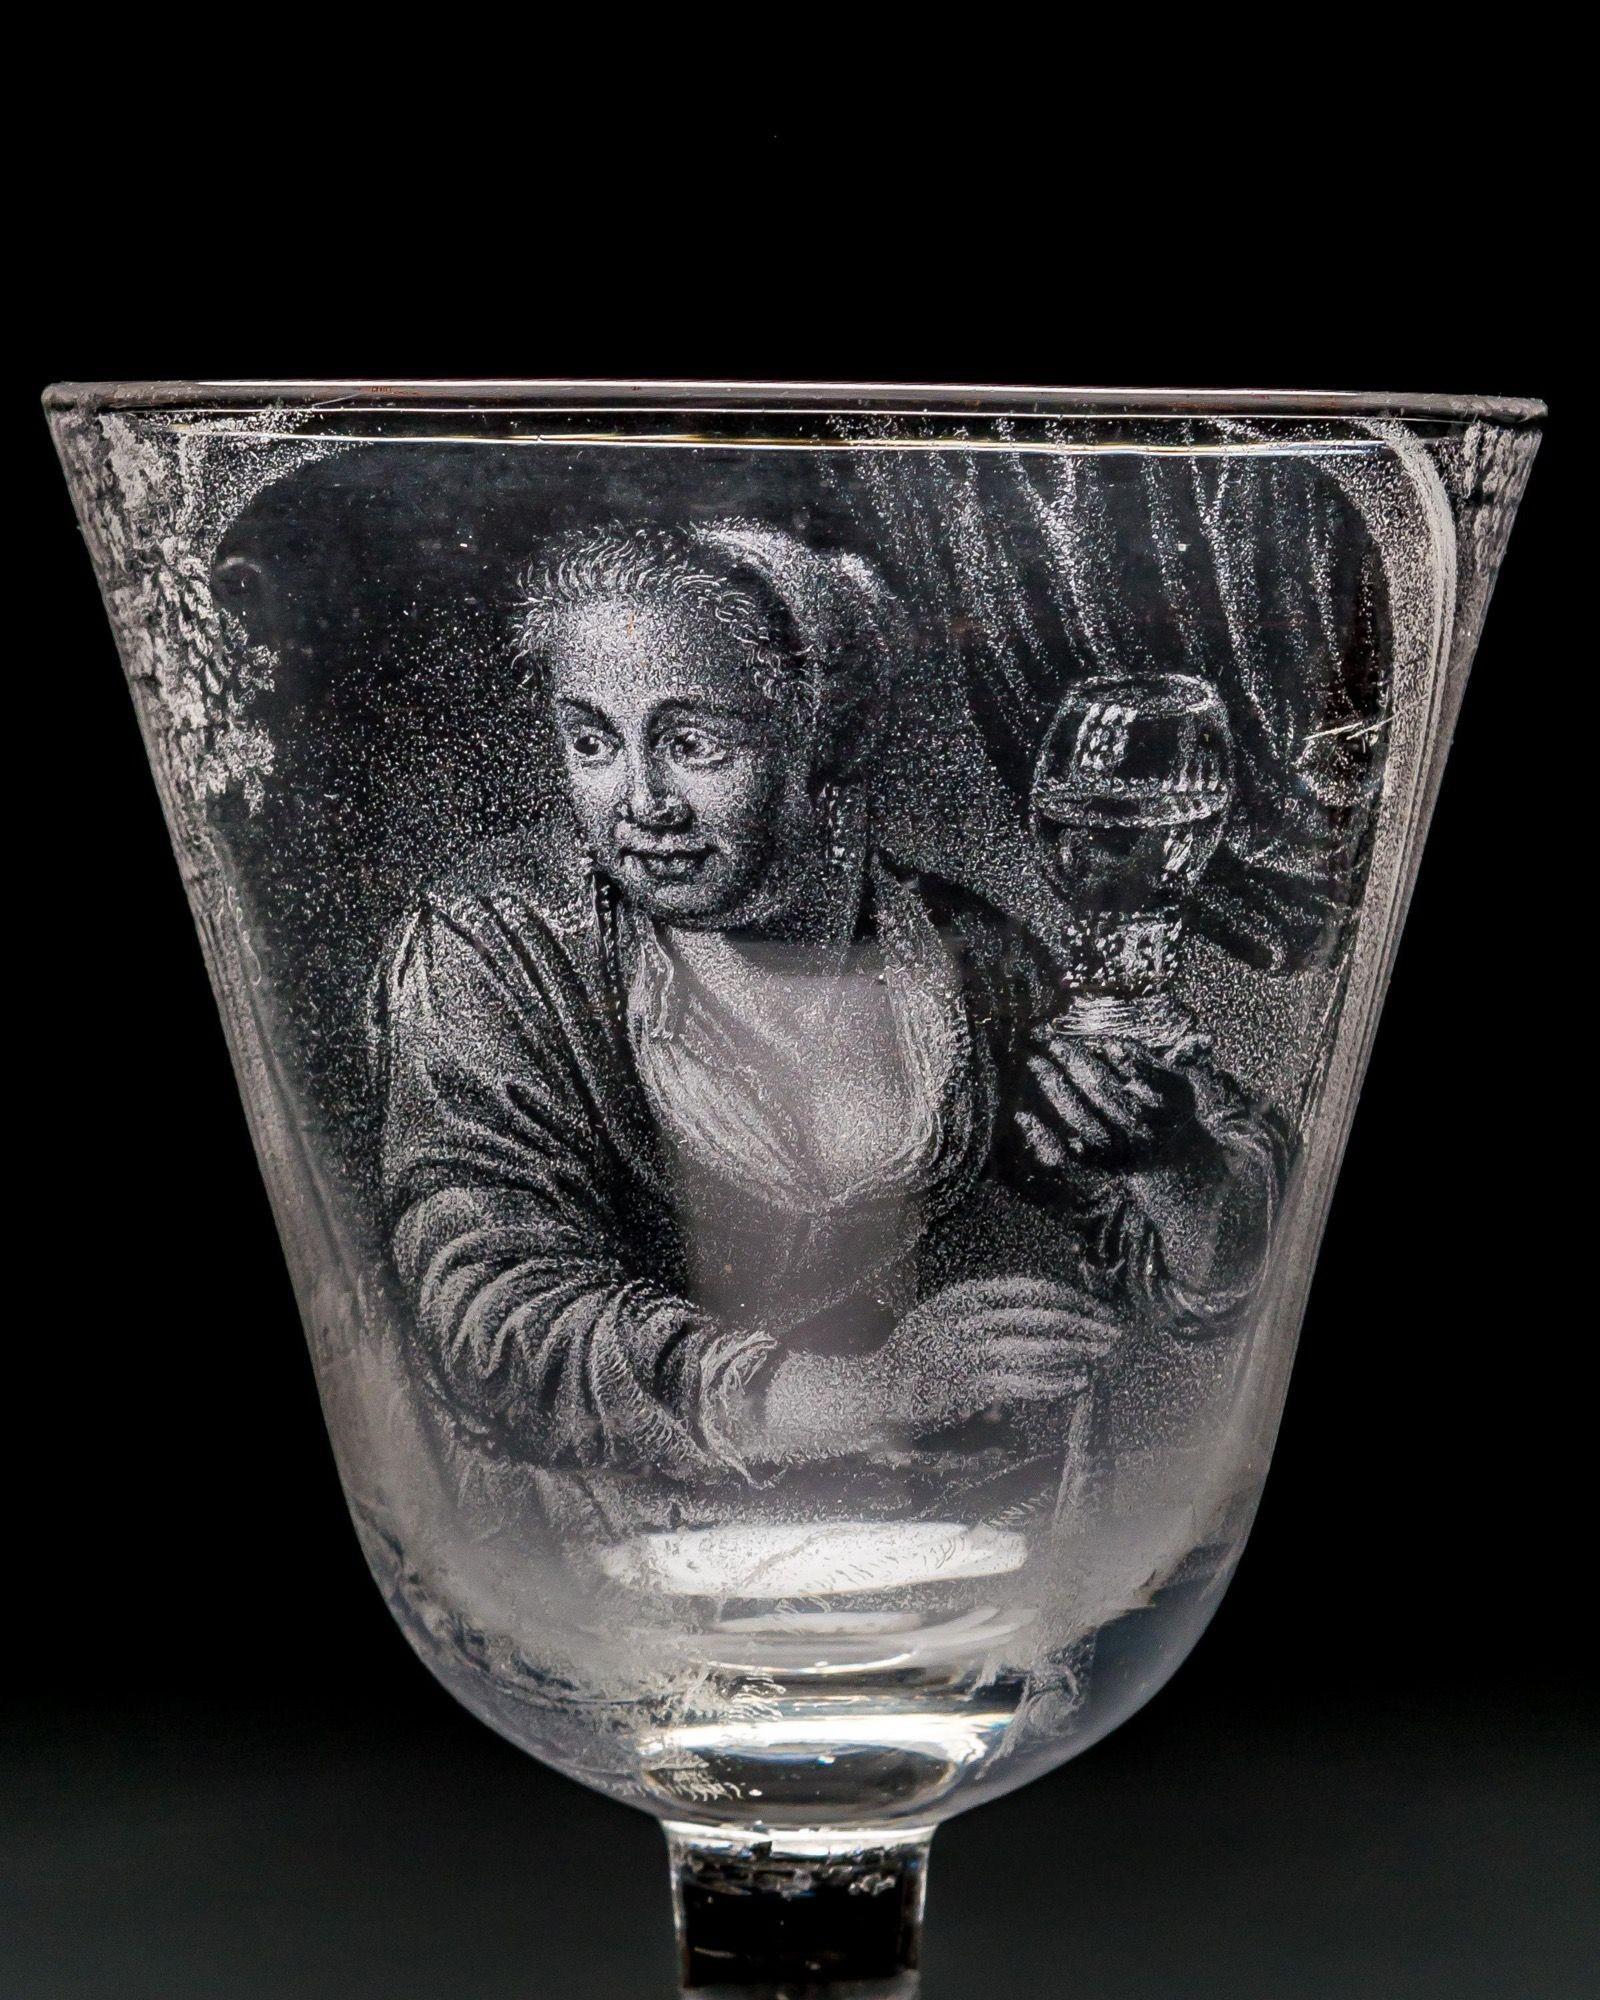 The round funnel bowl stipple-engraved with a half-length portrait of a female herring saleswoman holding up in her left hand a half-full roemer, and with her right hand a herring by its tail. Sat in an arched window frame with fruiting vines